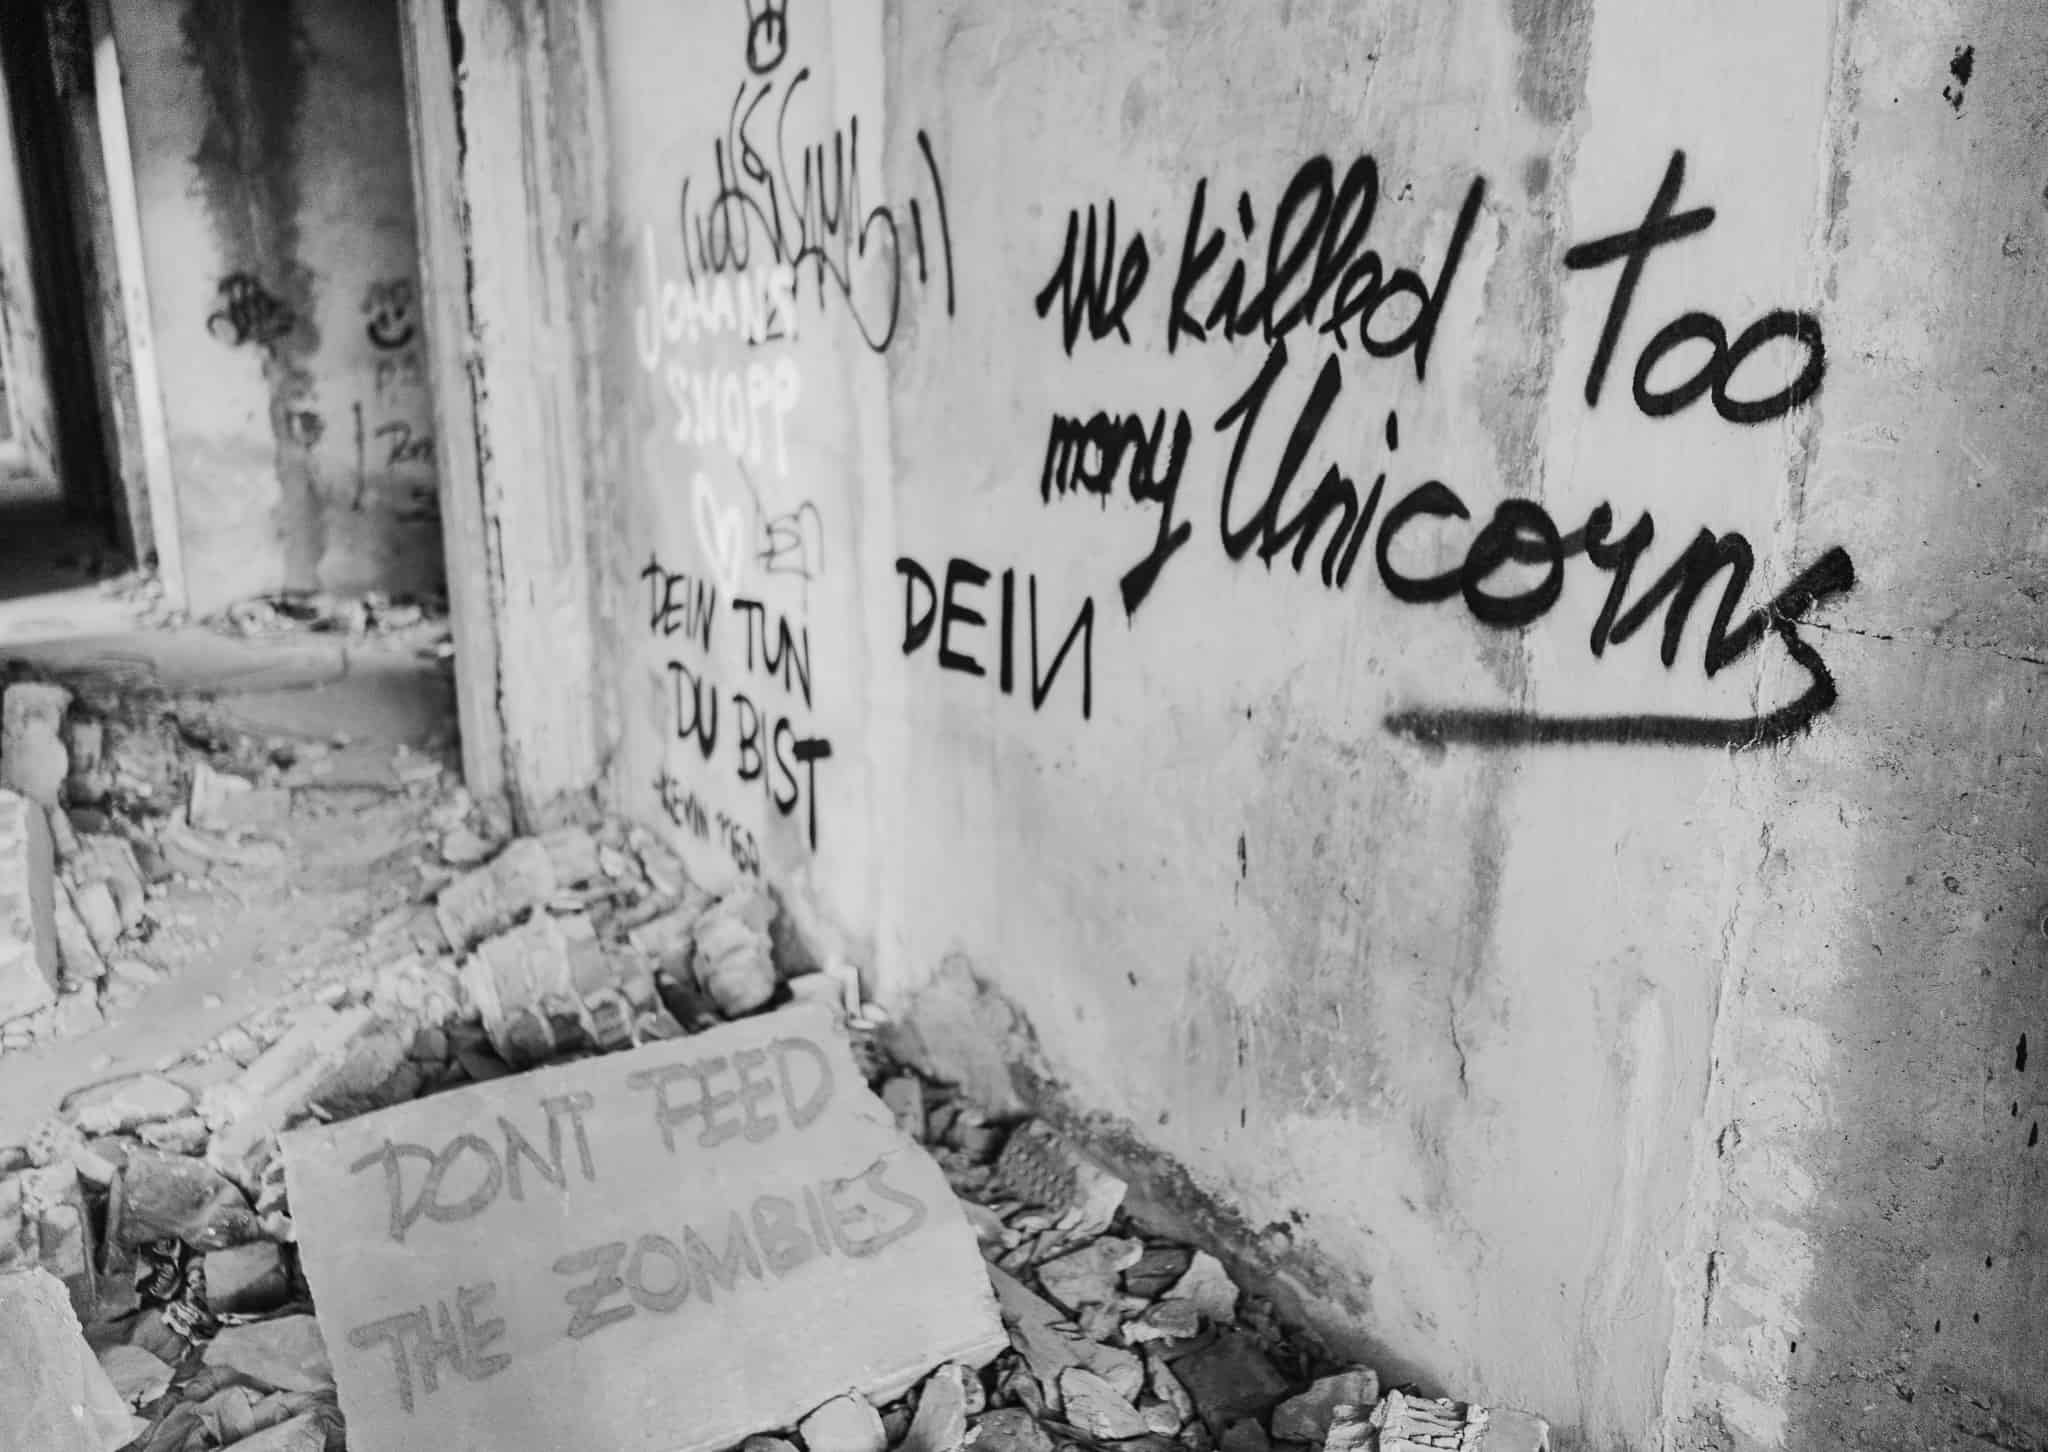 Black and white photo of graffiti in the Mostar sniper tower in Bosnia and Herzegovina that reads "we killed too many unicorns" and "don't feed the zombies"